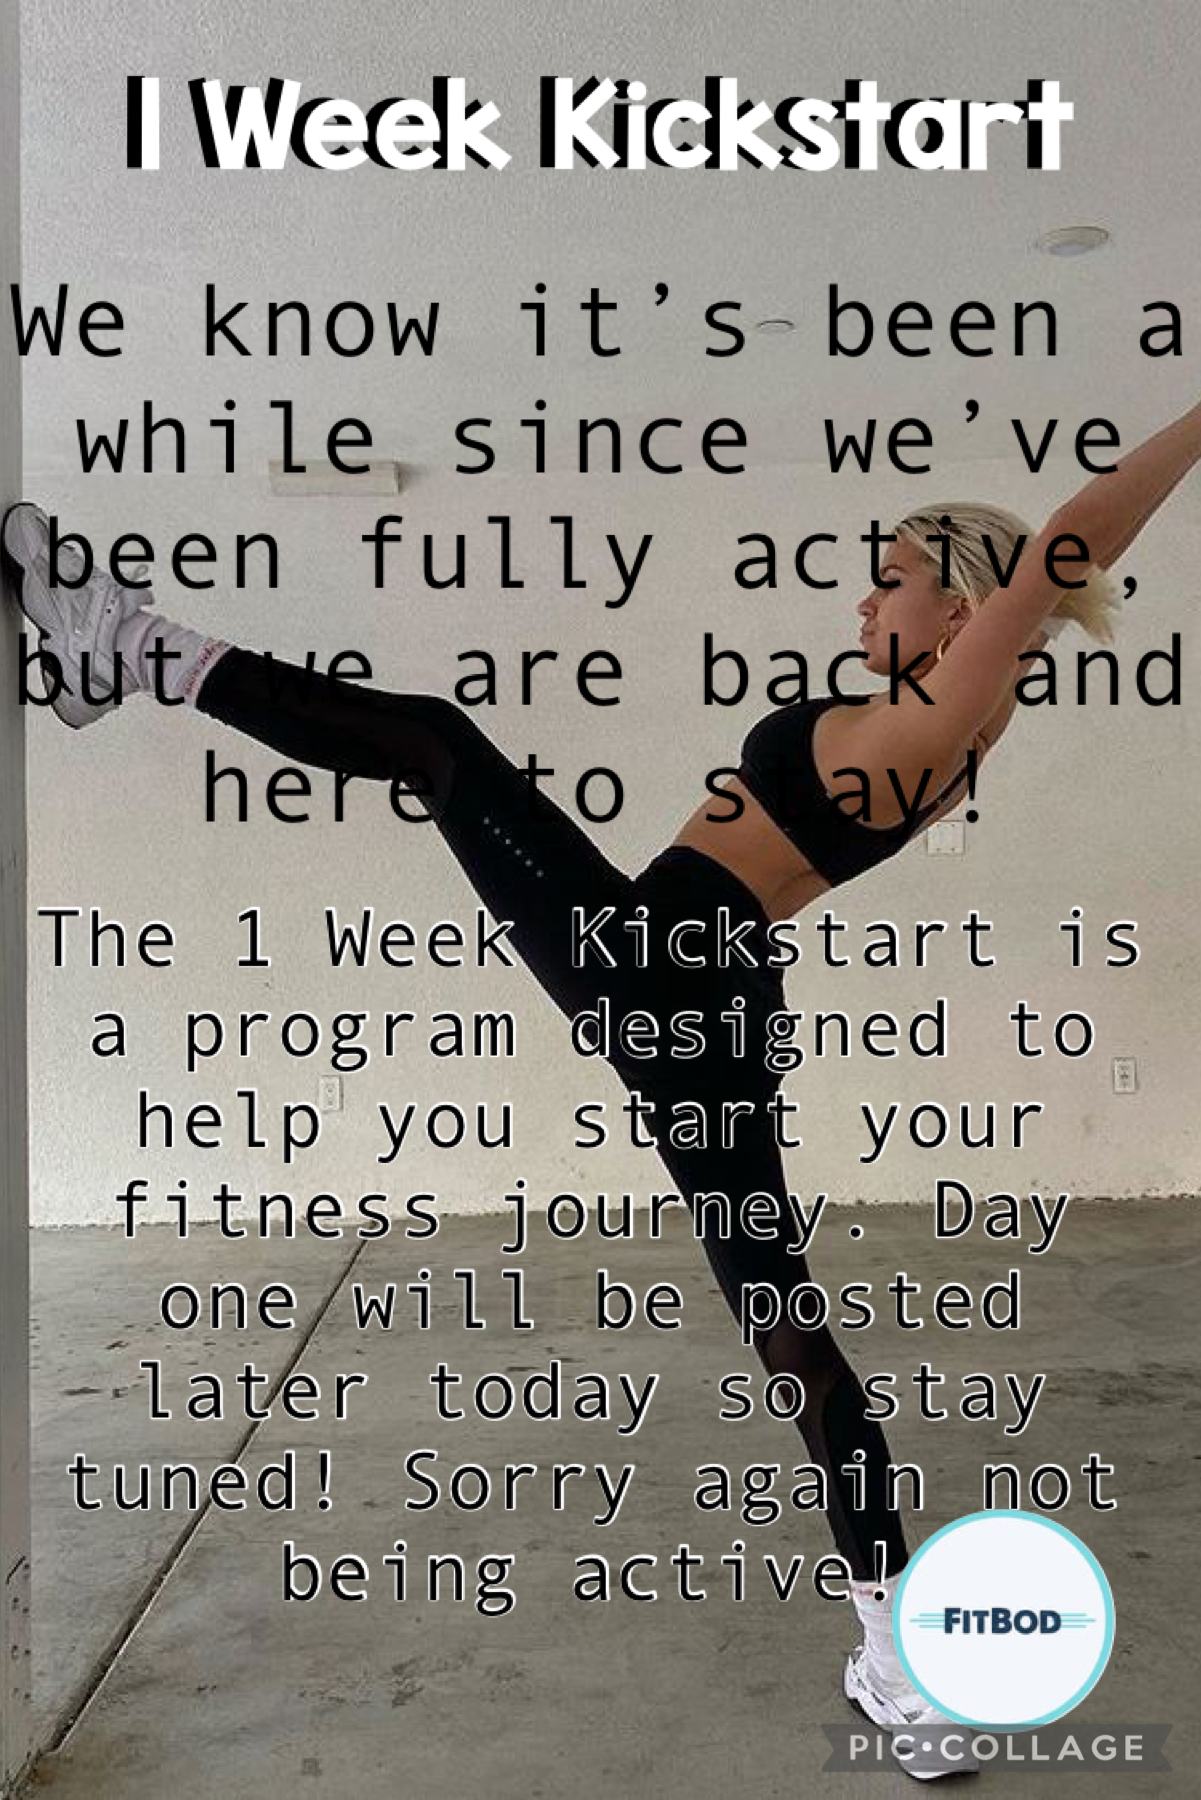 We are so excited to announce our 1 Week Kickstart program for FREE! Again, we are truly sorry for the delay but we hope this will make up for it! Stay tuned for day one and your 1 Week Kickstart guide💪🏼❤️